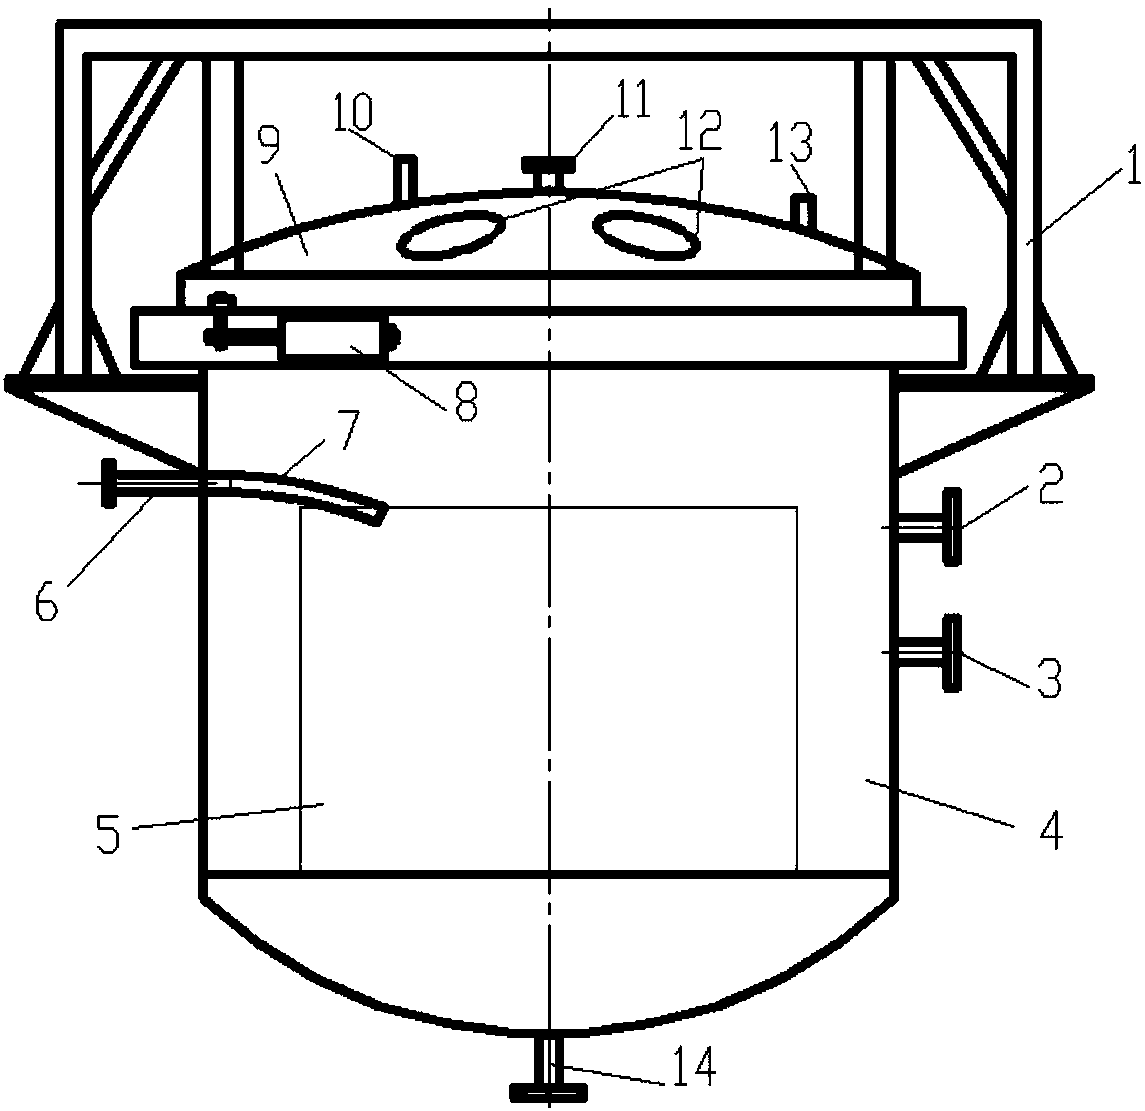 Sintered model resin infiltration method and vacuum infiltration device